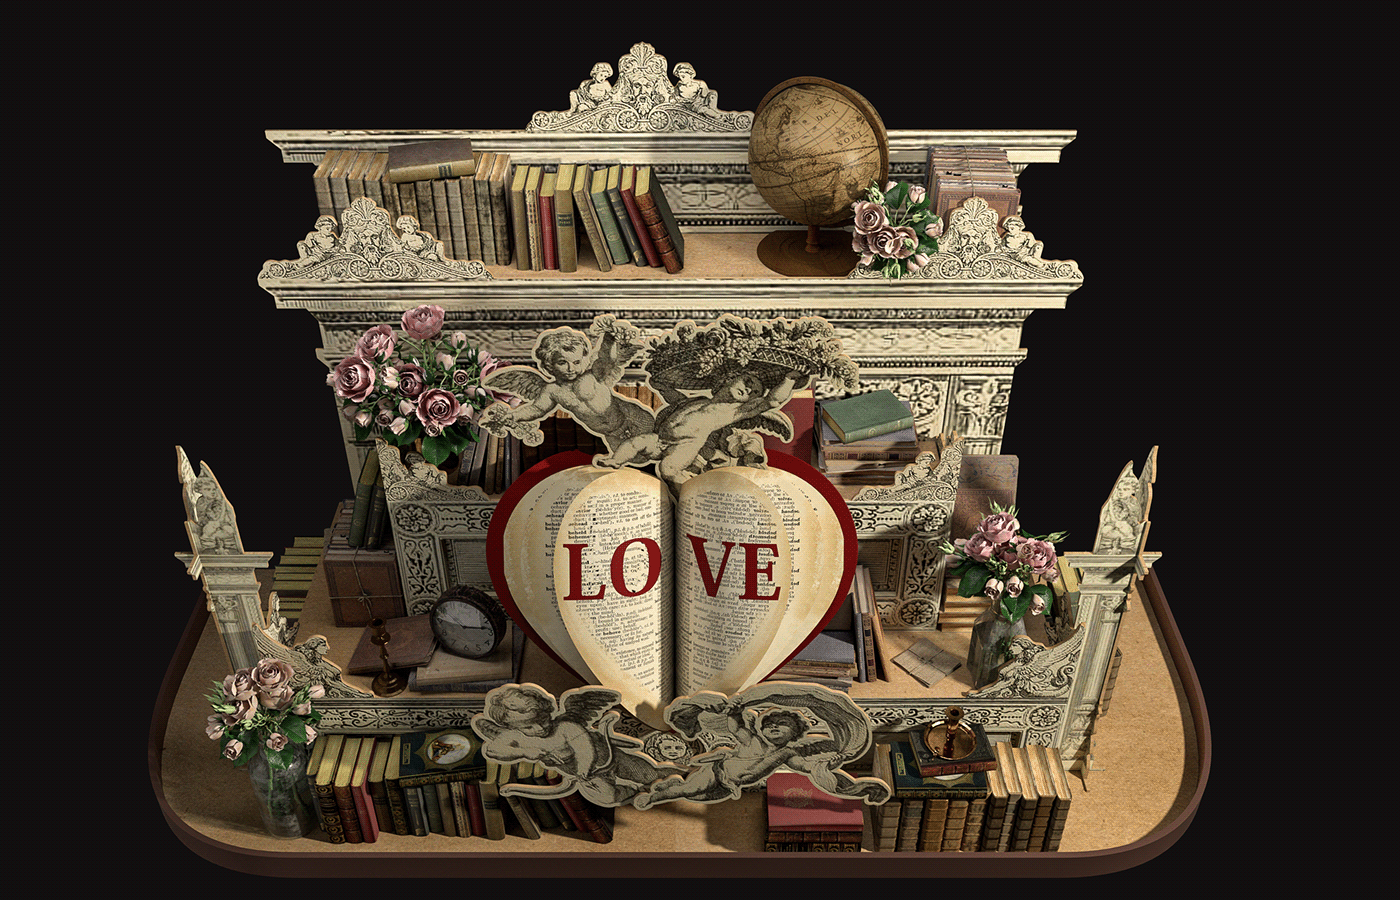 Angles book Bookstore cupid DUO DESIGN Love Renaissance Stefan bolpacic valentines Window Display